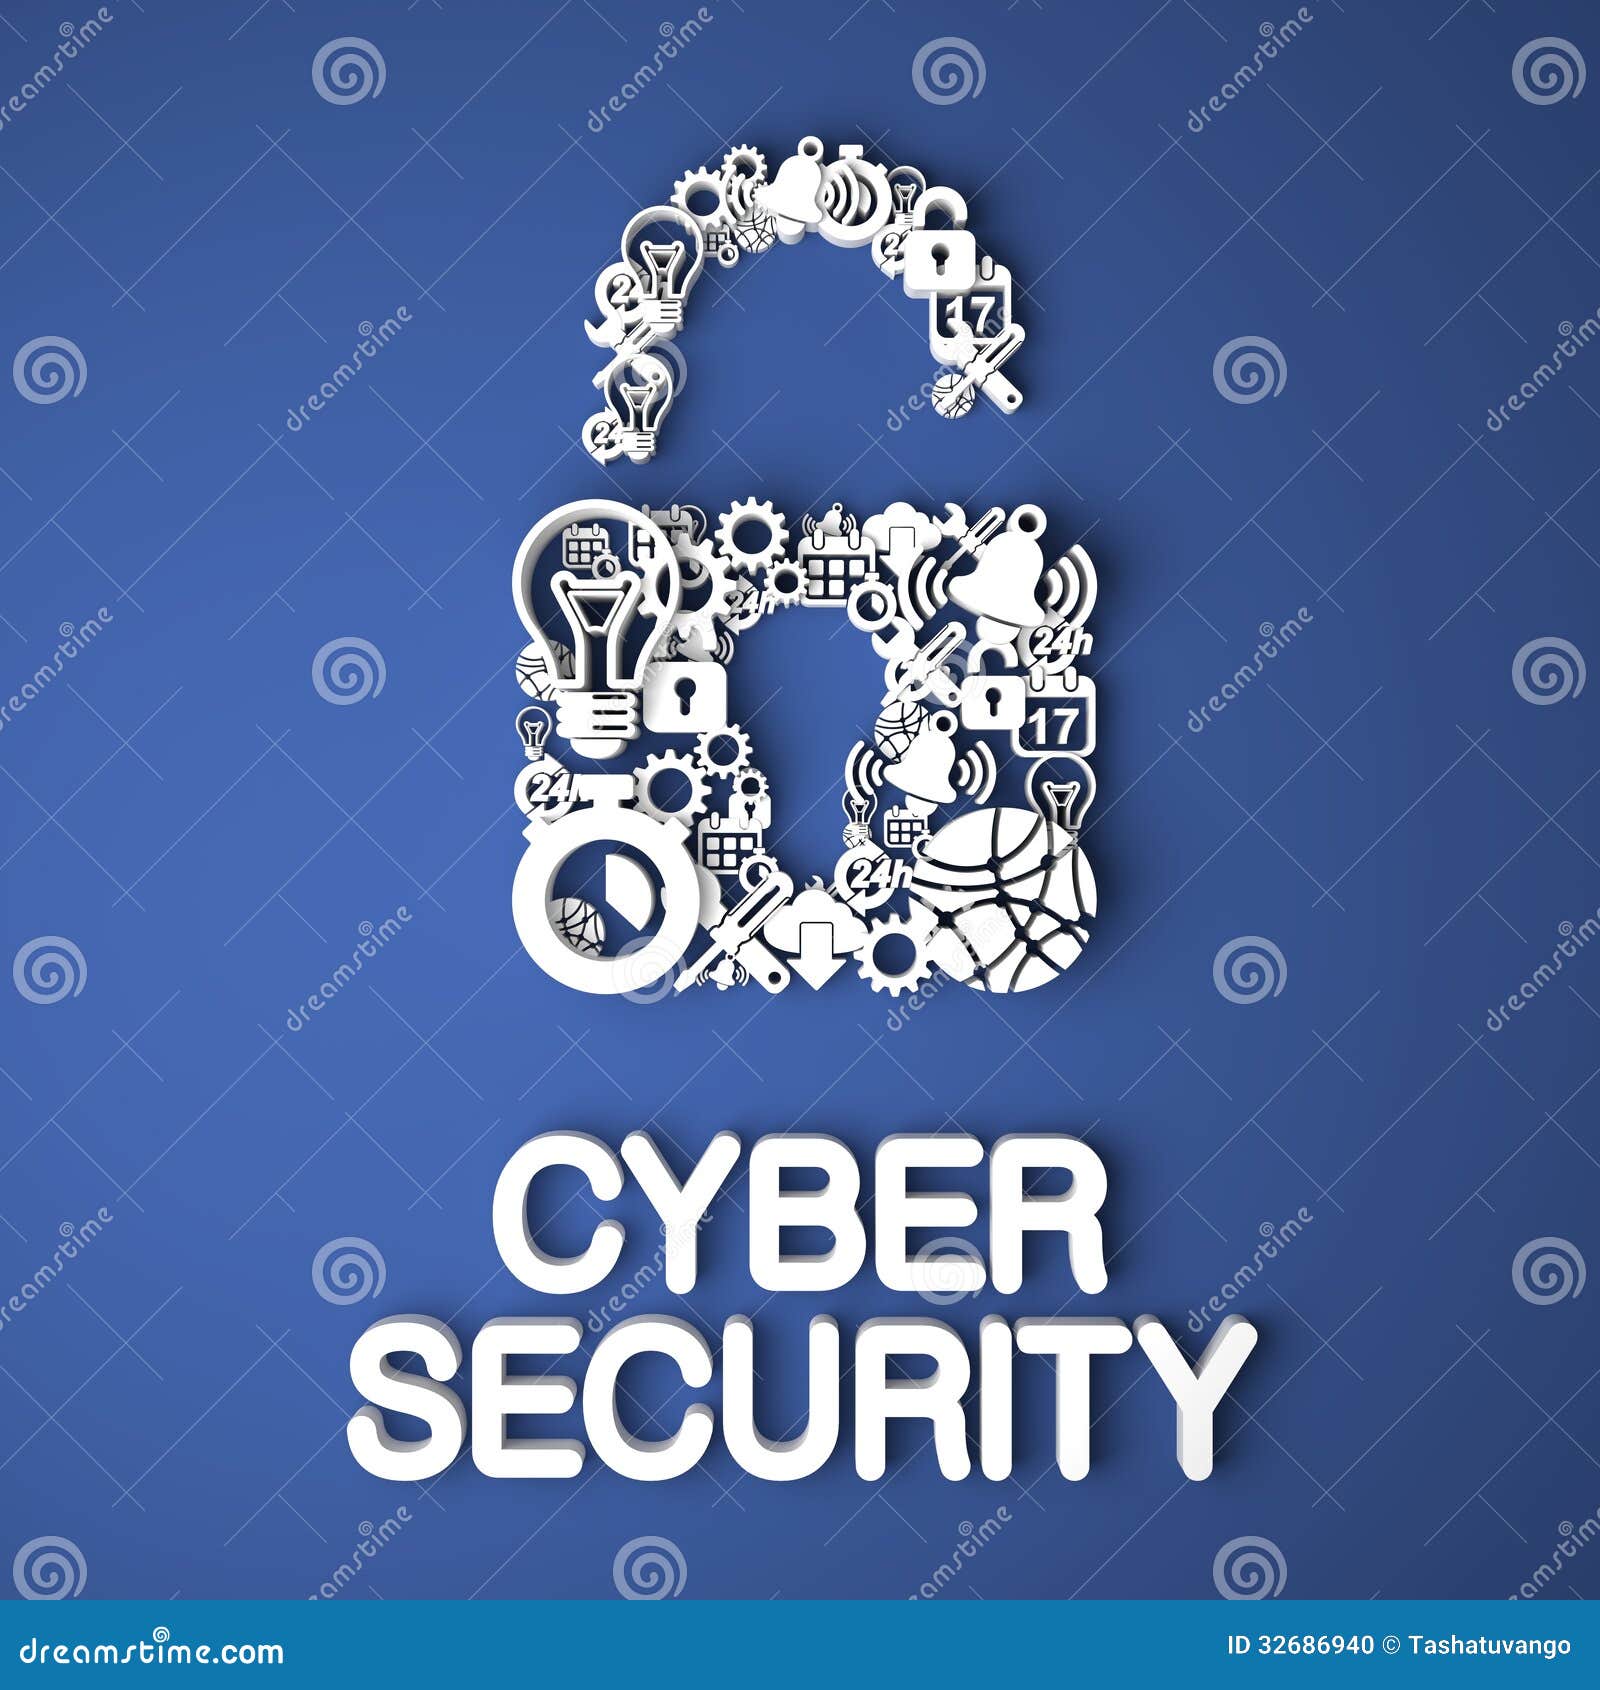 cyber security clipart free - photo #43